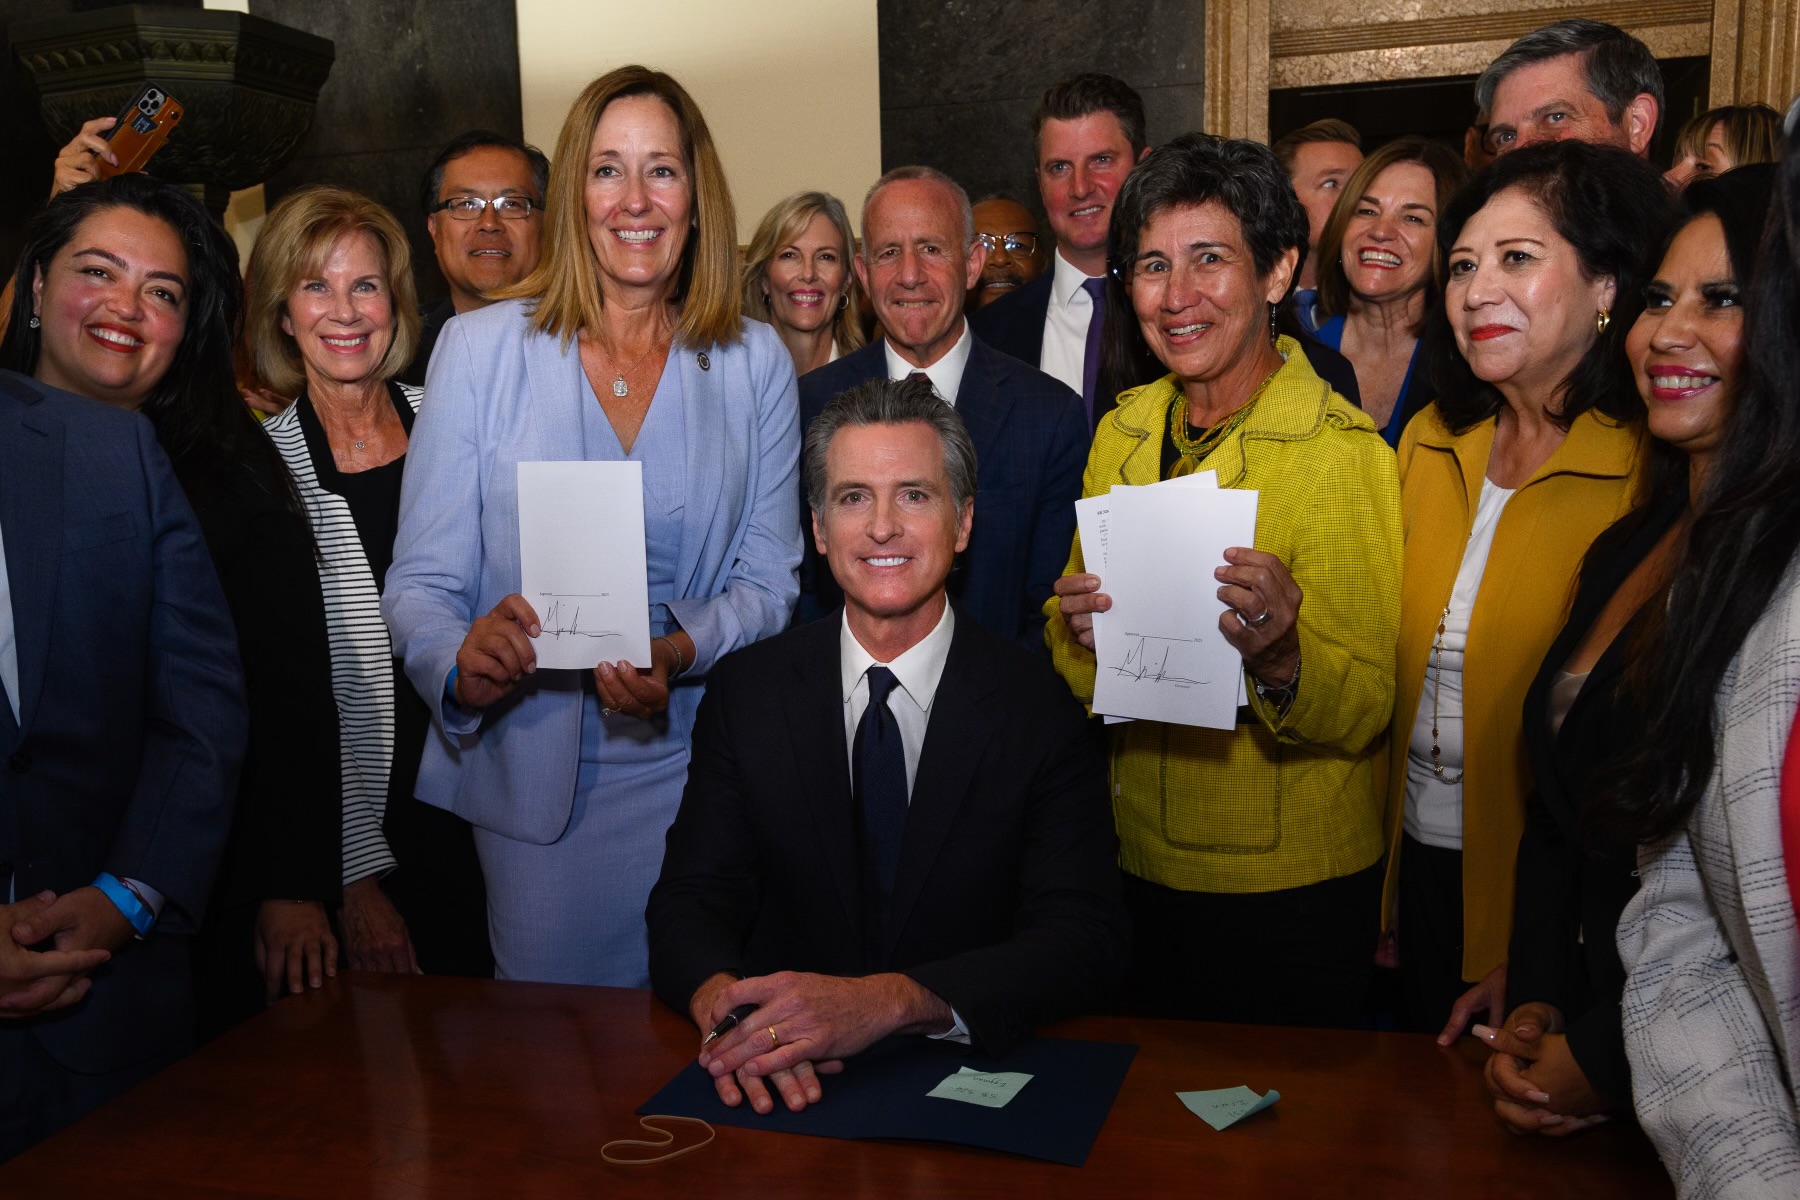 Governor Gavin Newsom with bill author CA Assemblymember District 42 Jacqui Irwin (in blue) and co-sponsor Susan Eggman - CA Senator District 5 (in yellow). Also in attendance were First District Supervisor Hilda Solis and Fourth District Supervisor Janice Hahn.